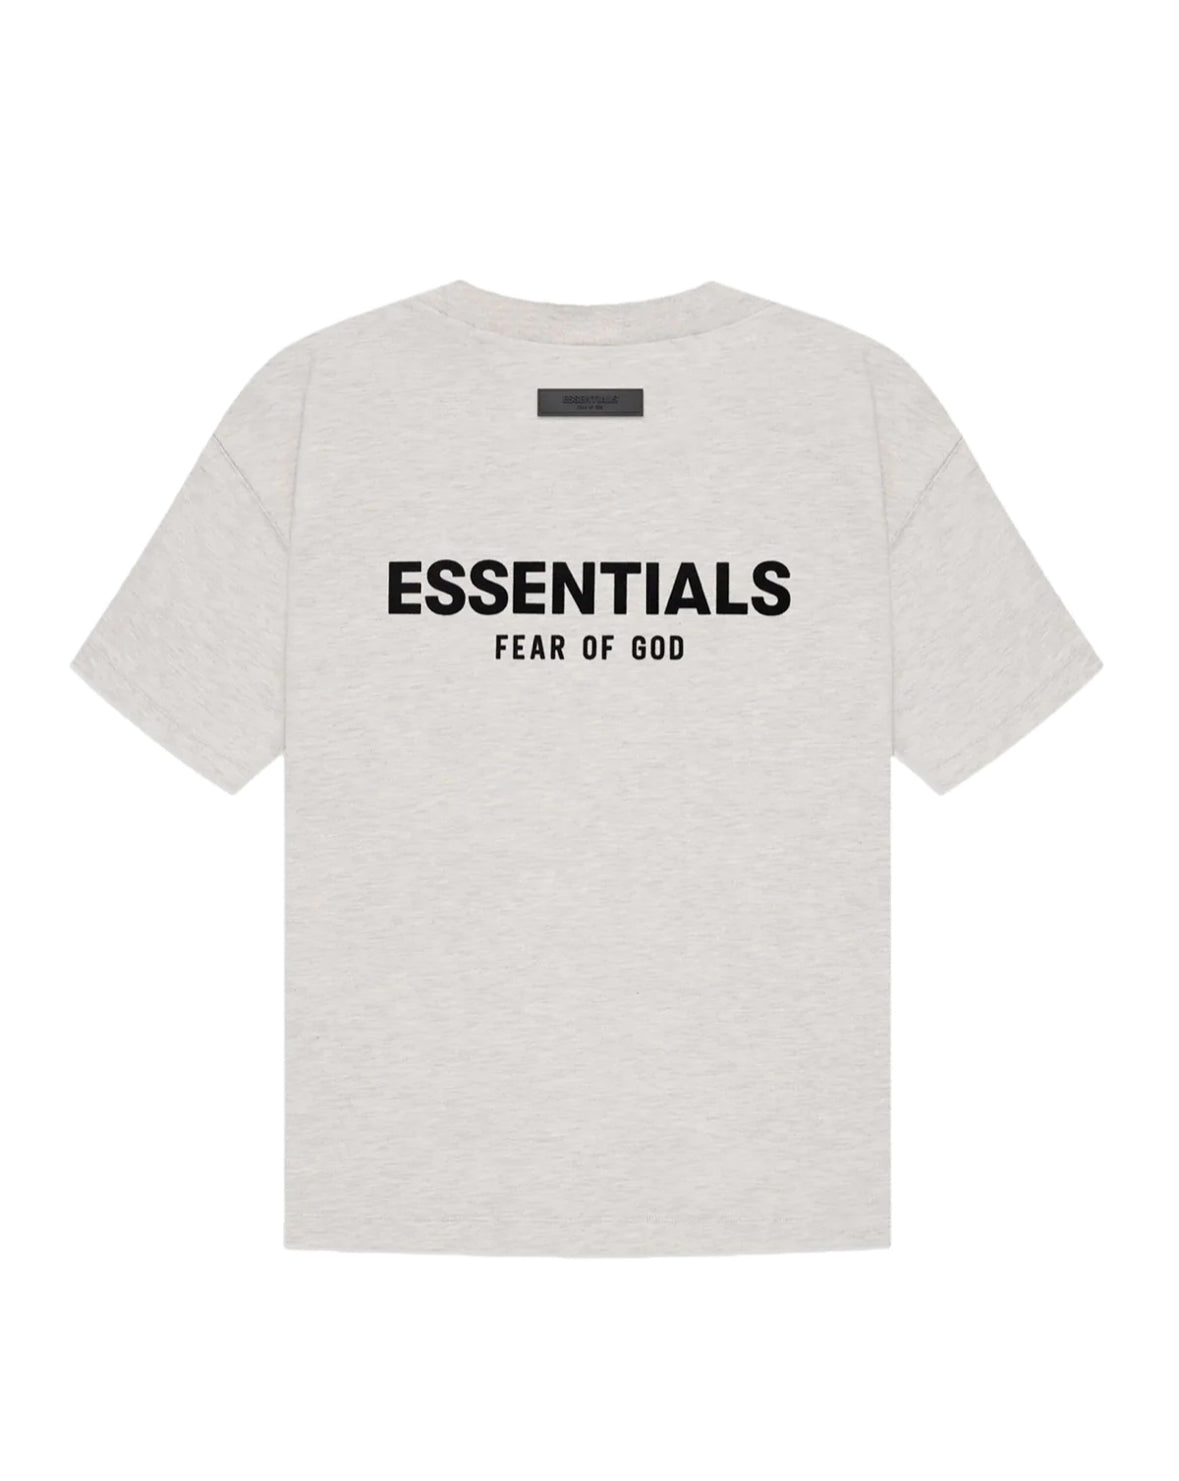 ESSENTIALS t-shirt                          Core collection 2022